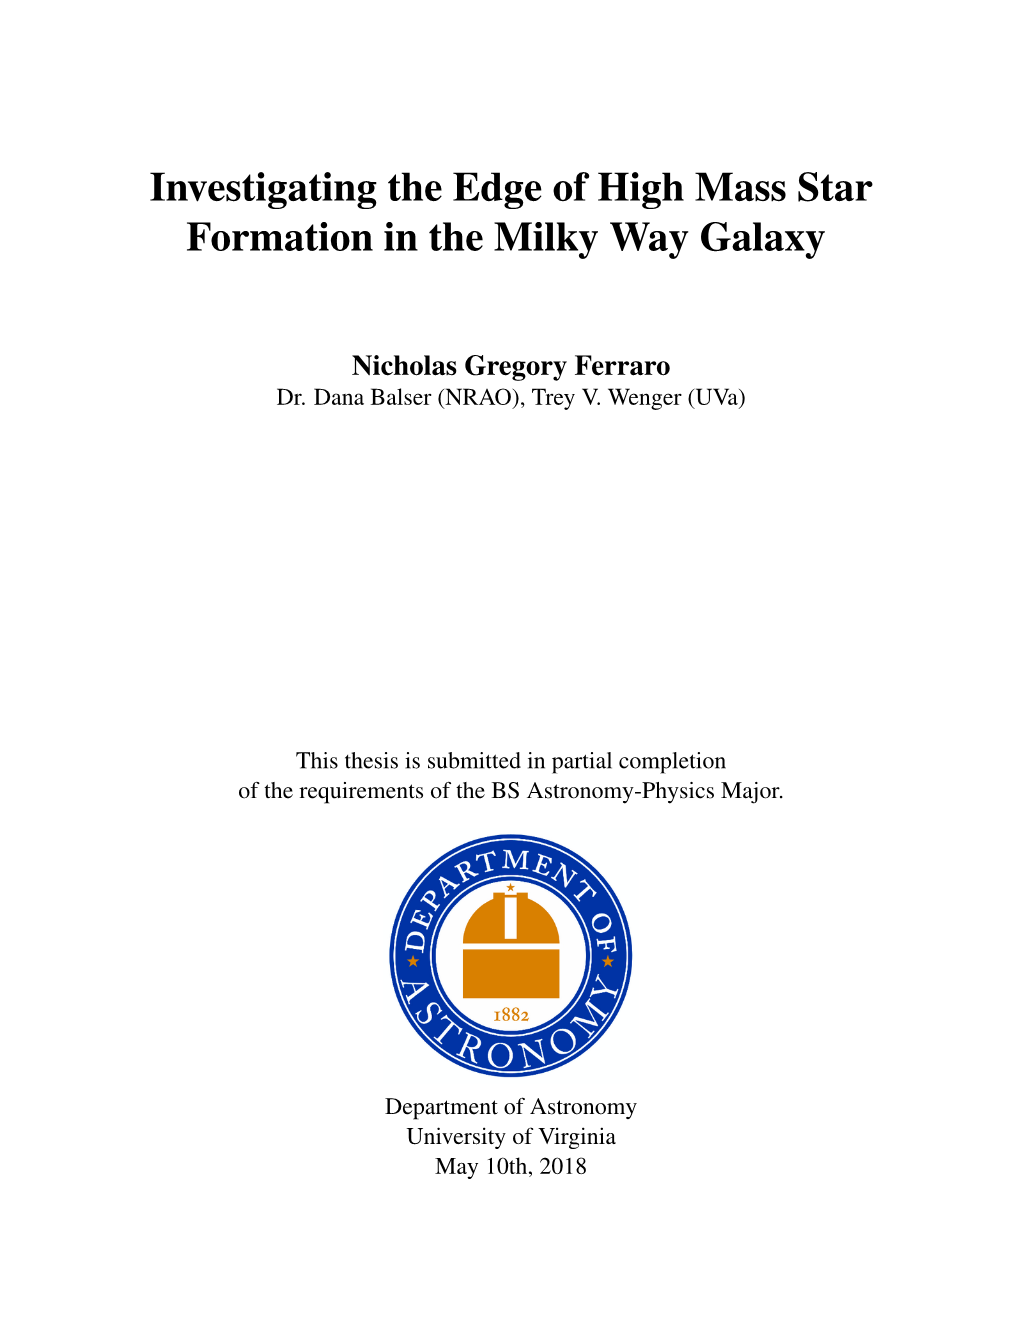 Investigating the Edge of High Mass Star Formation in the Milky Way Galaxy